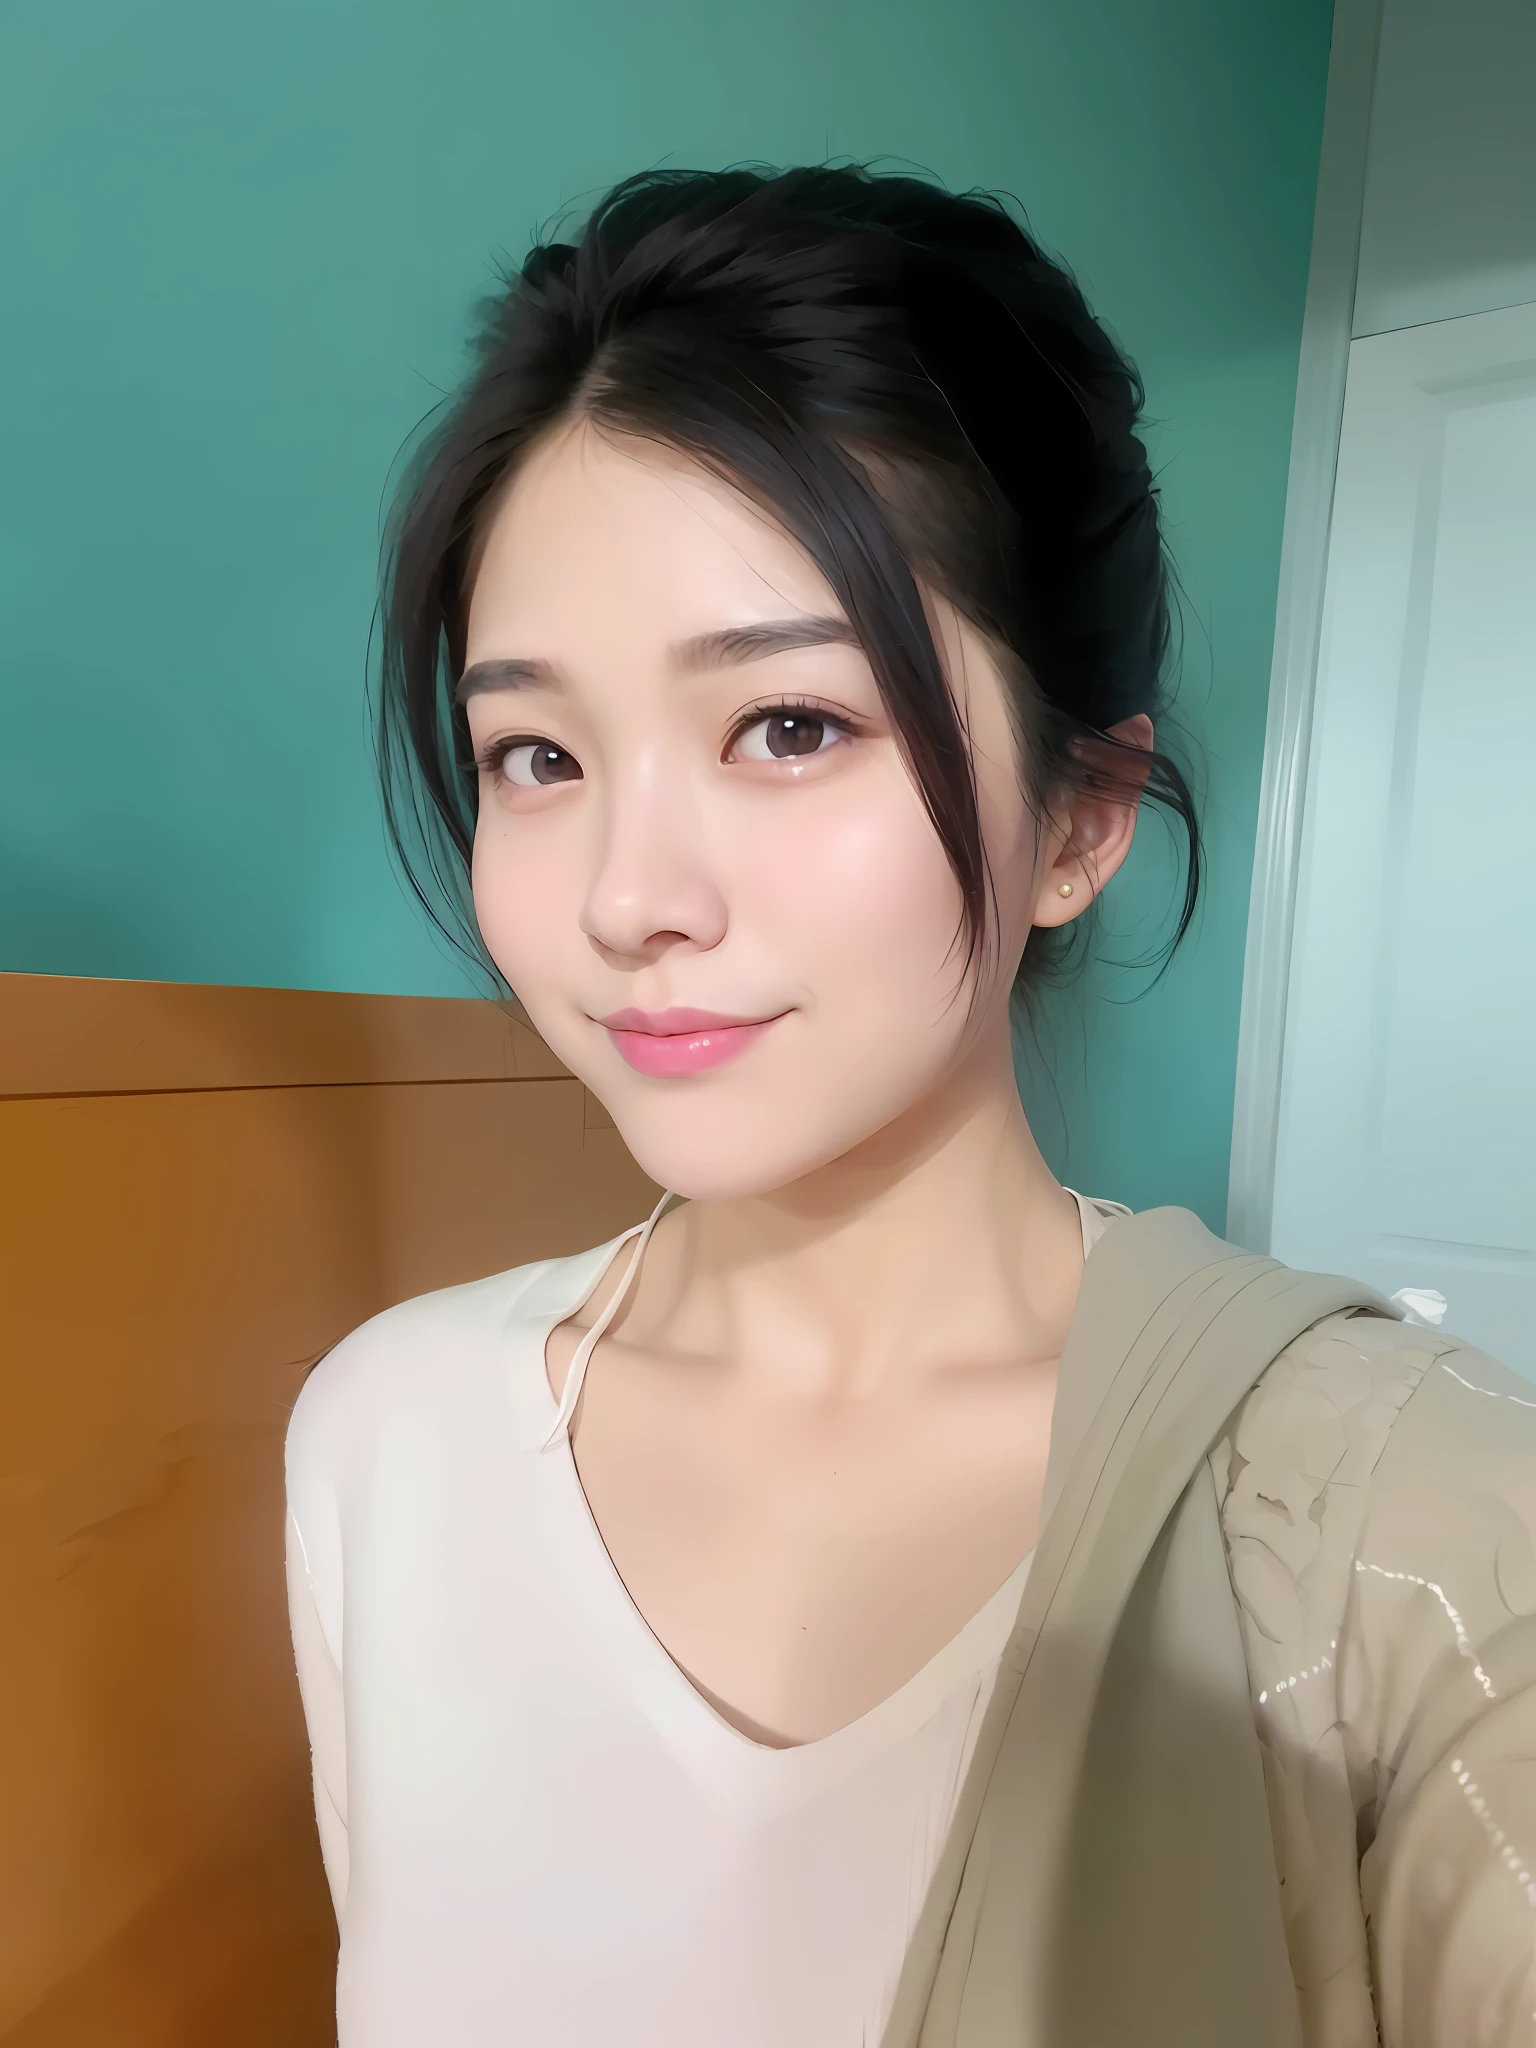 there is a woman that is standing in front of a bed, young adorable korean face, young cute wan asian face, gorgeous young korean woman, beautiful young korean woman, beautiful south korean woman, korean girl, heonhwa choe, 8k selfie photograph, jaeyeon nam, lee ji-eun, lee ji - eun, korean woman, female actress from korea